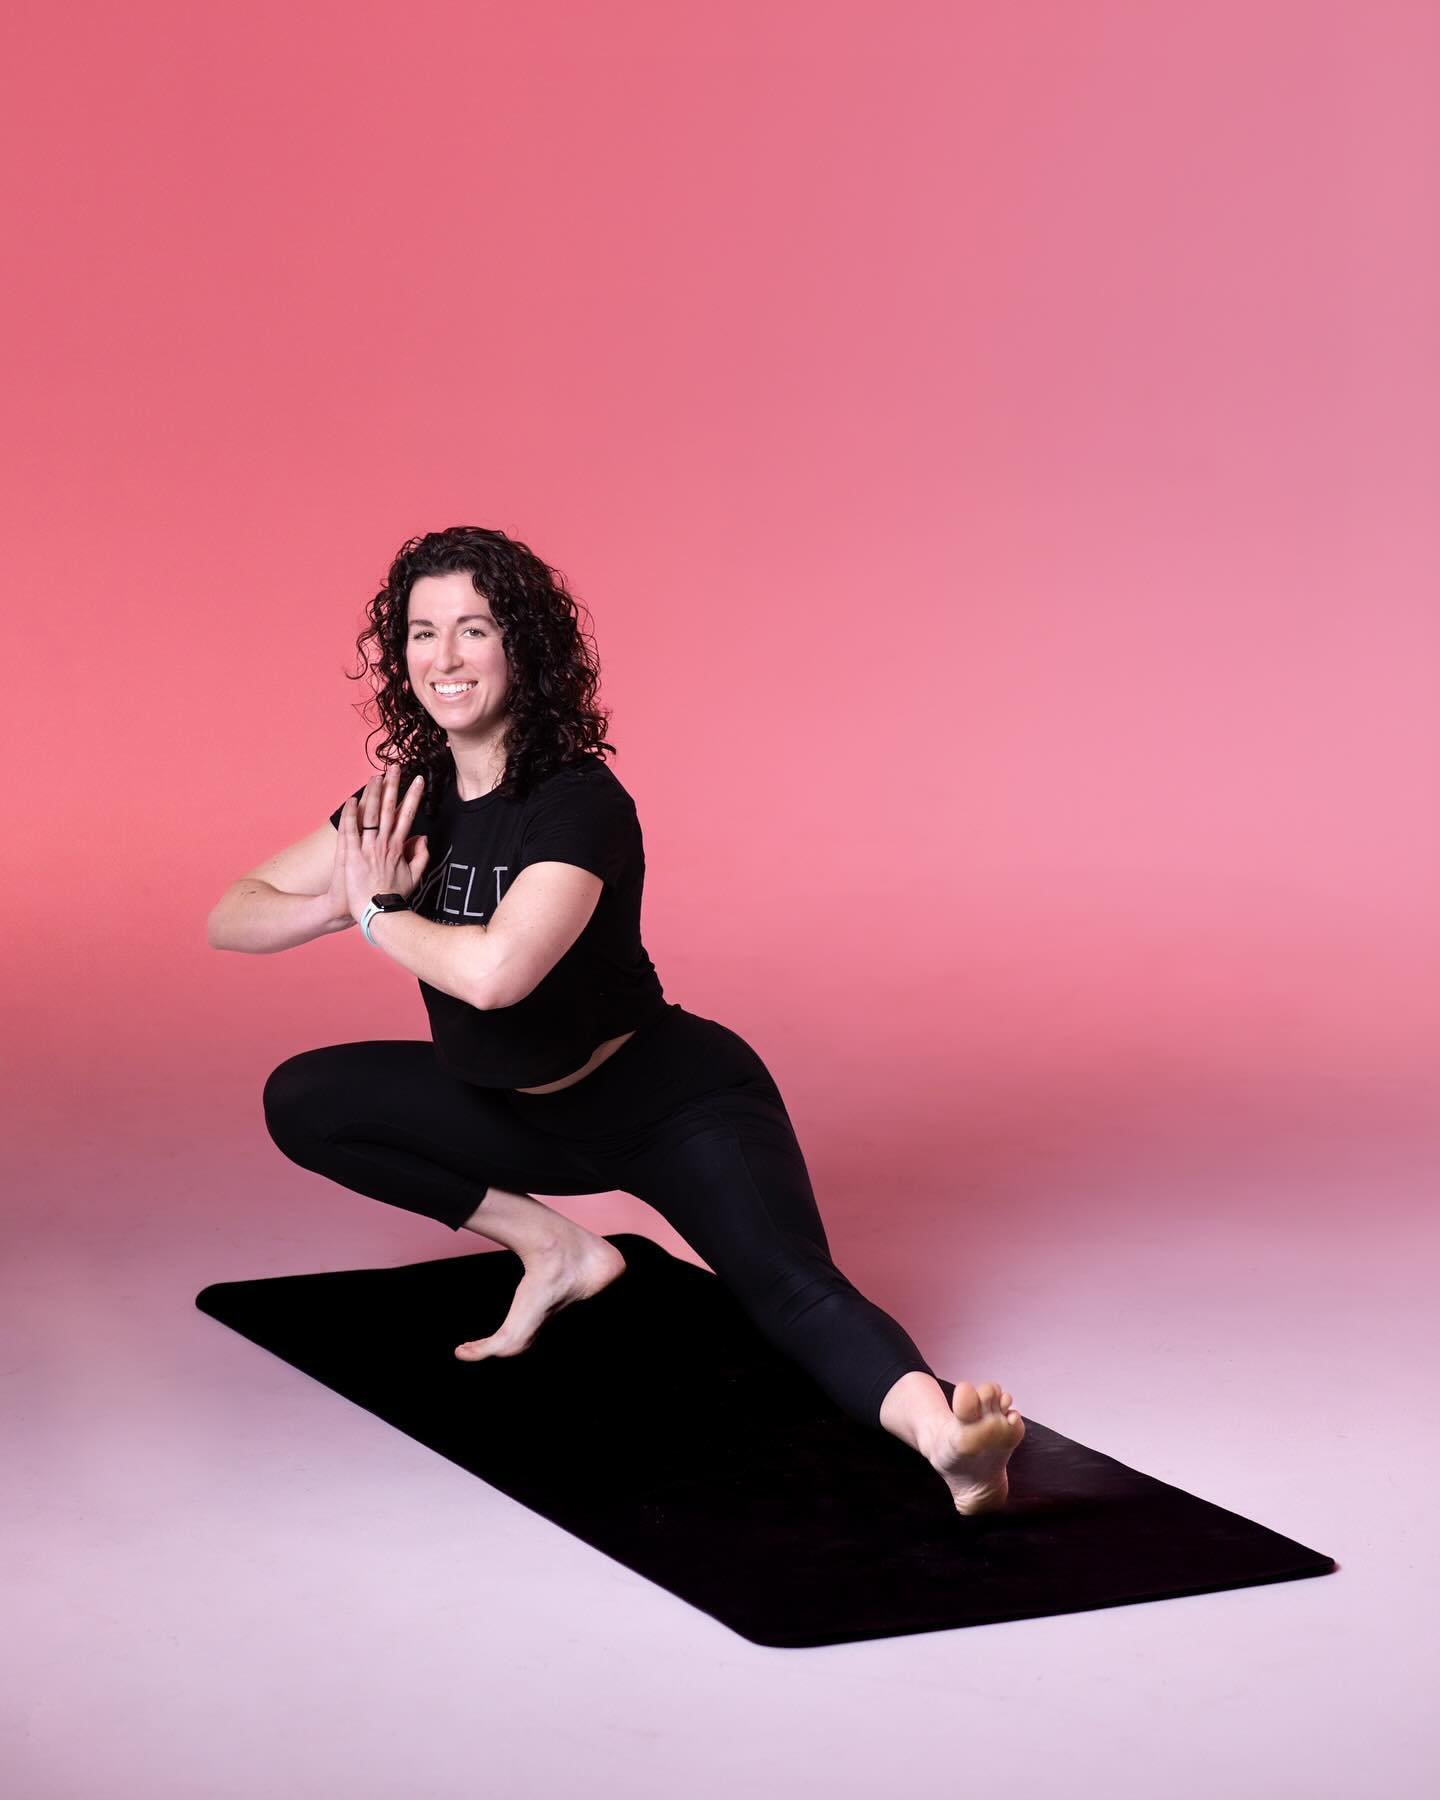 Yoga produces the perfect rhythm of body movements synced with the breath. 

Melt Vinyasa takes things up a notch - adding a little spice to that harmony. Taking you to your mental &amp; physical edge, out of your comfort zone and into the strongest 